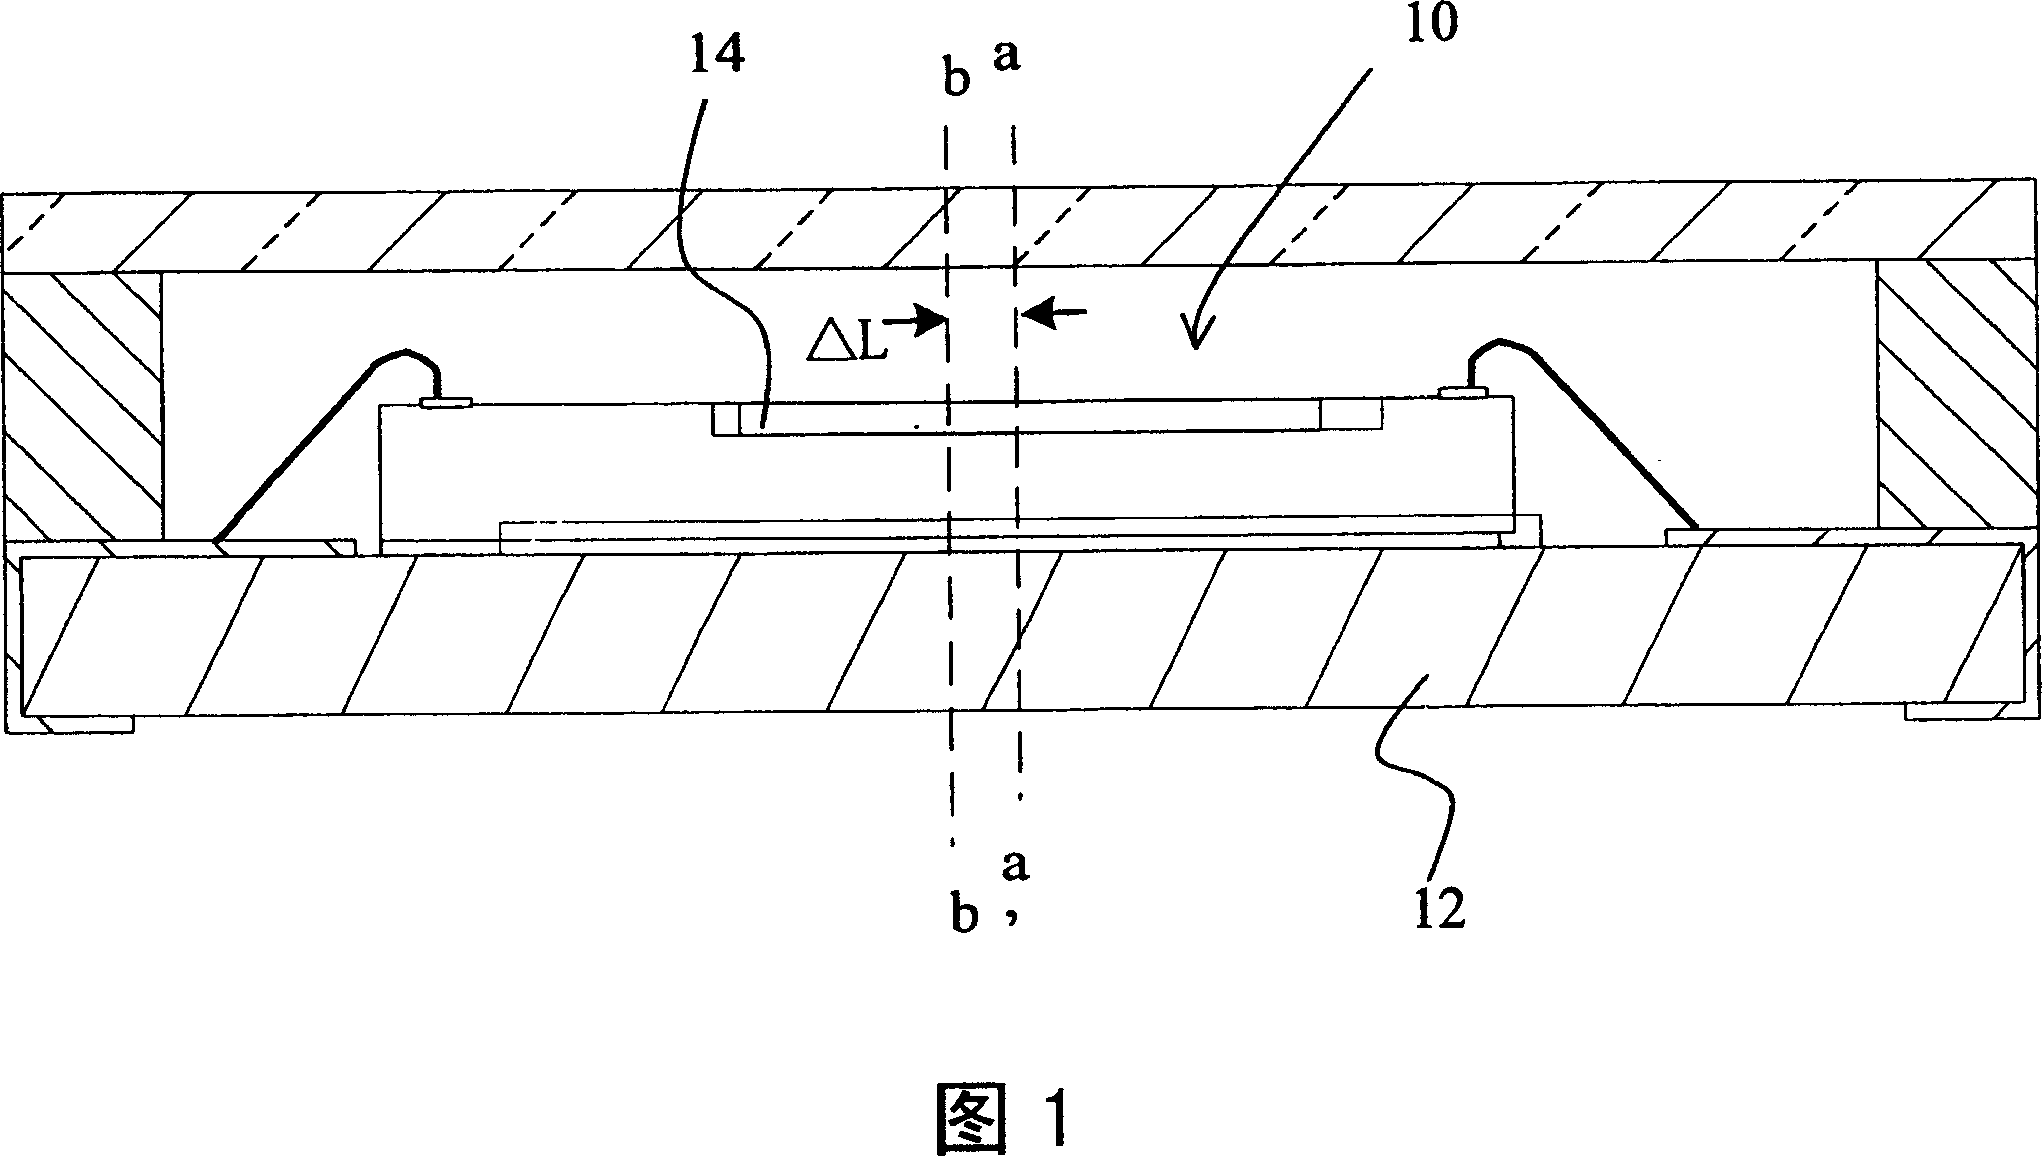 Encapsulation structure of optical sensing element with micro-packaging area